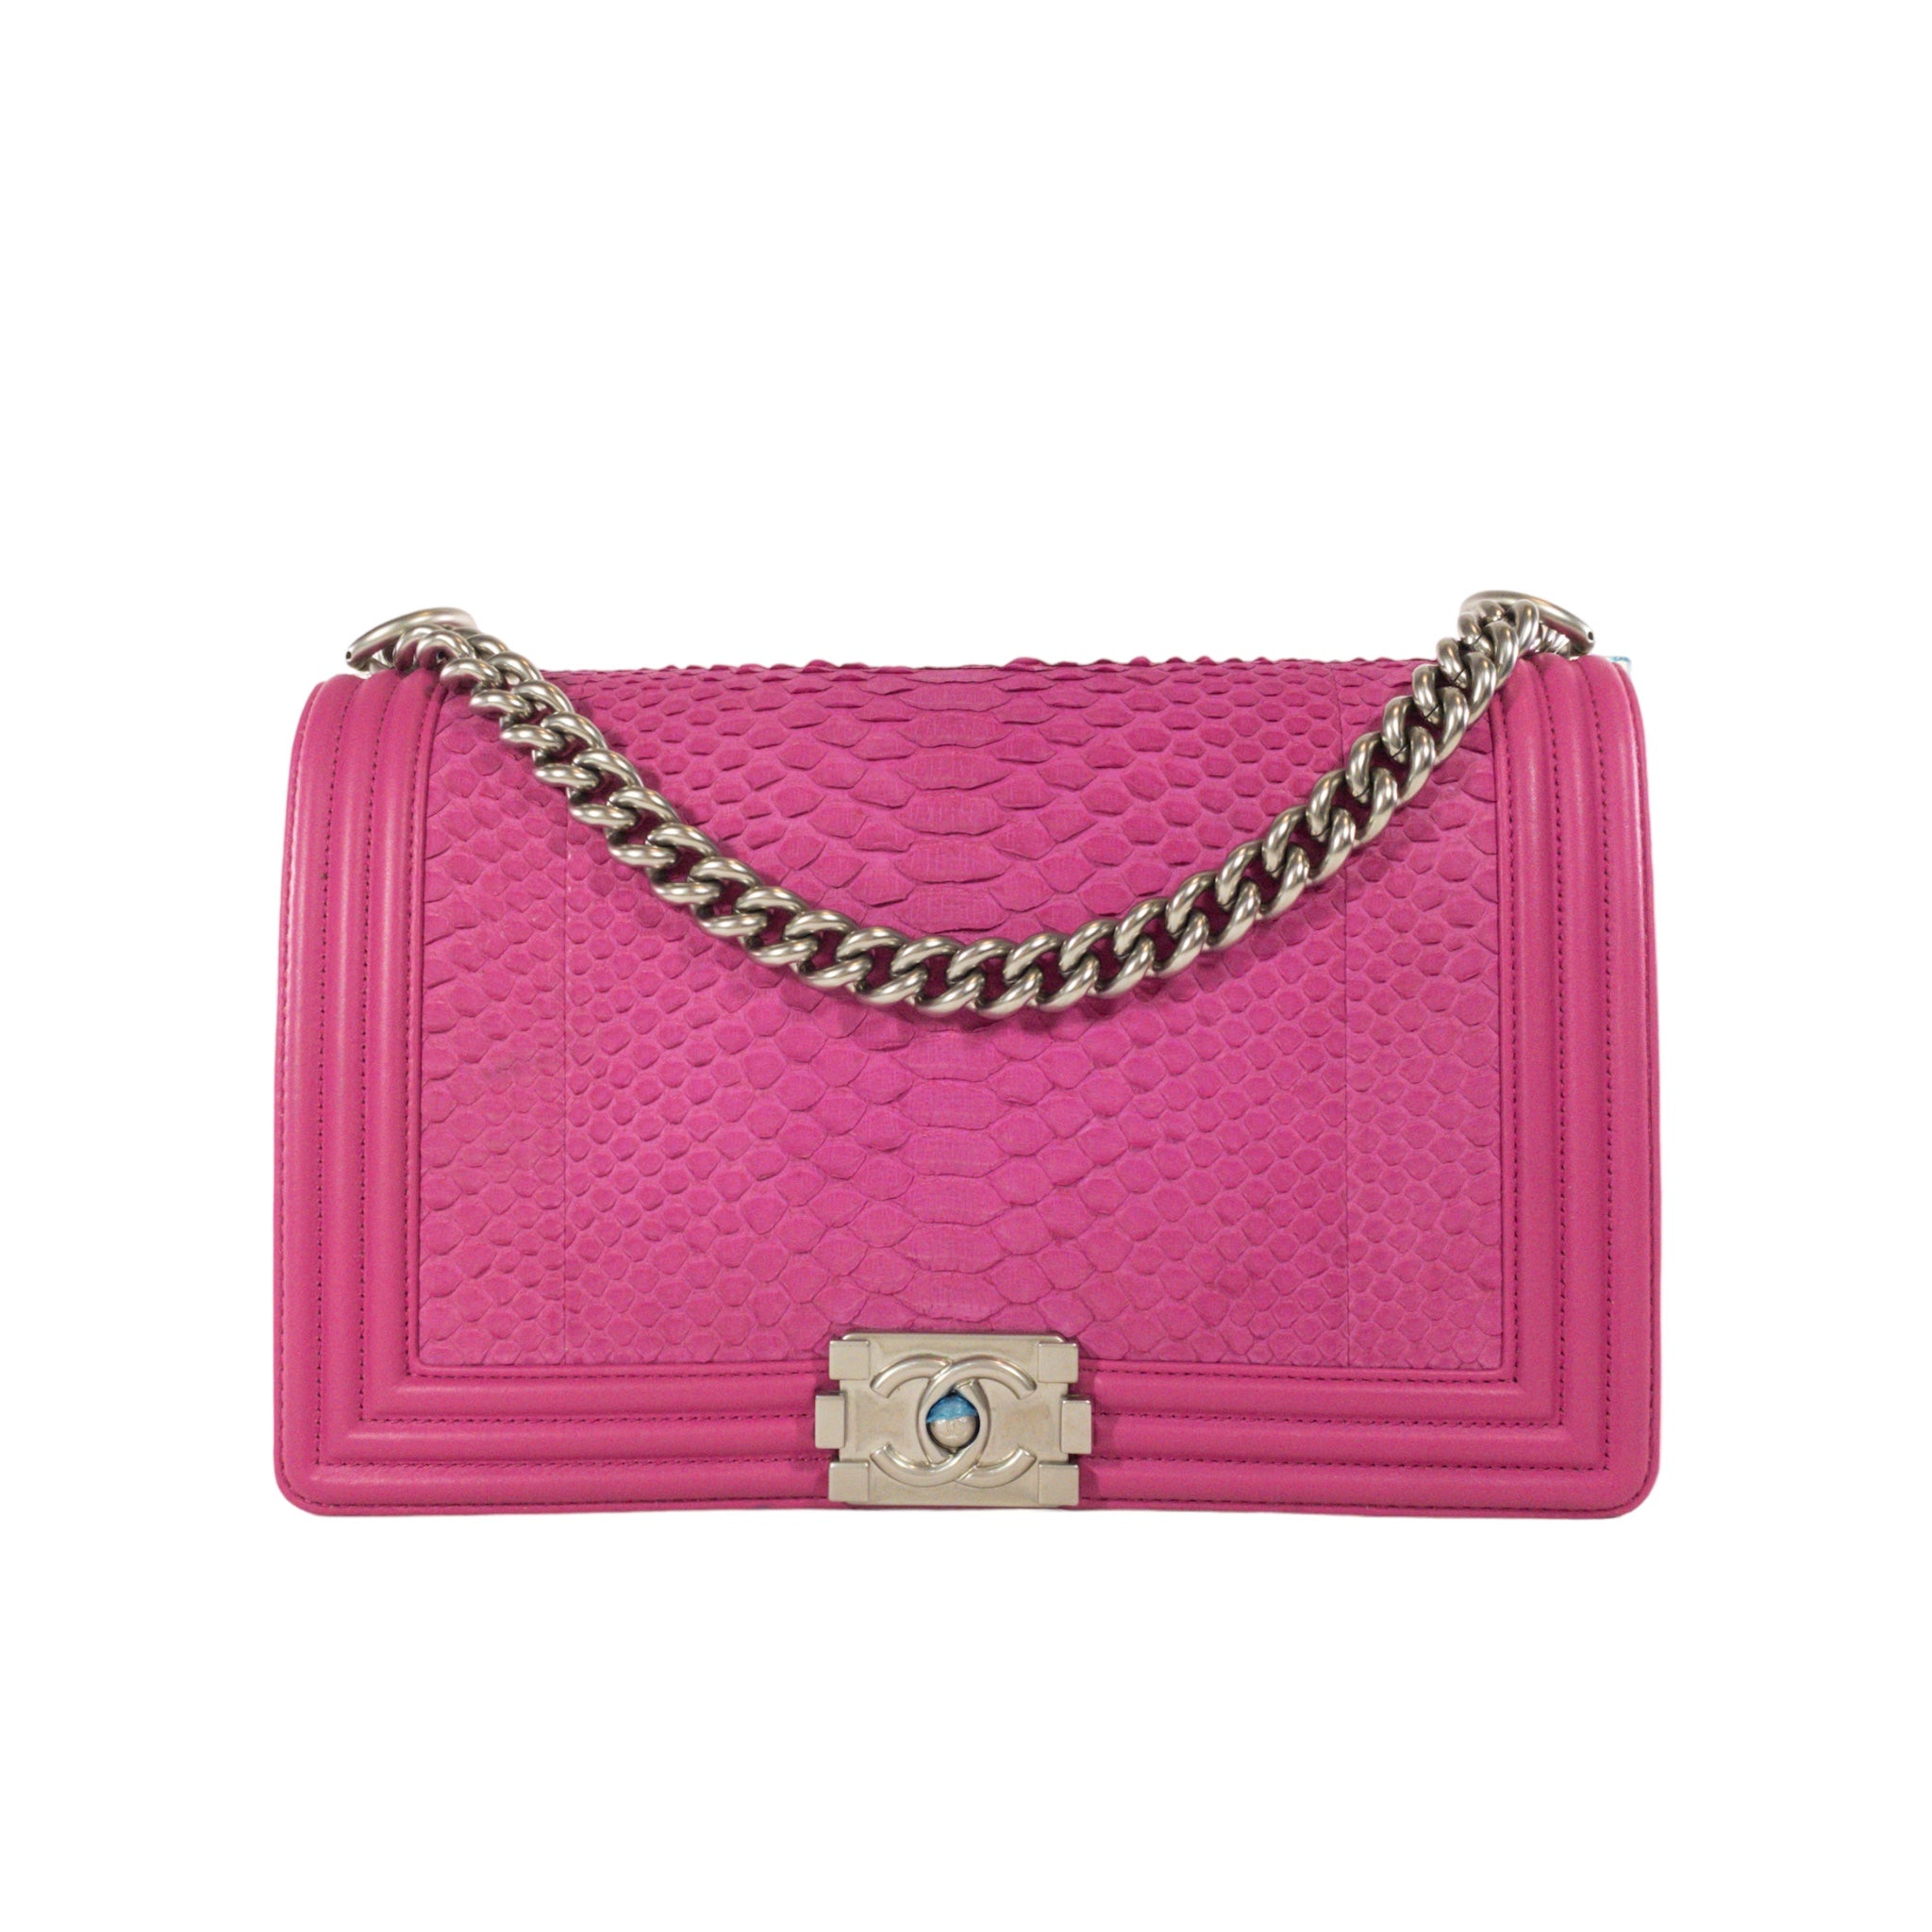 Chanel Pink Quilted Leather Large Boy Flap Bag Chanel